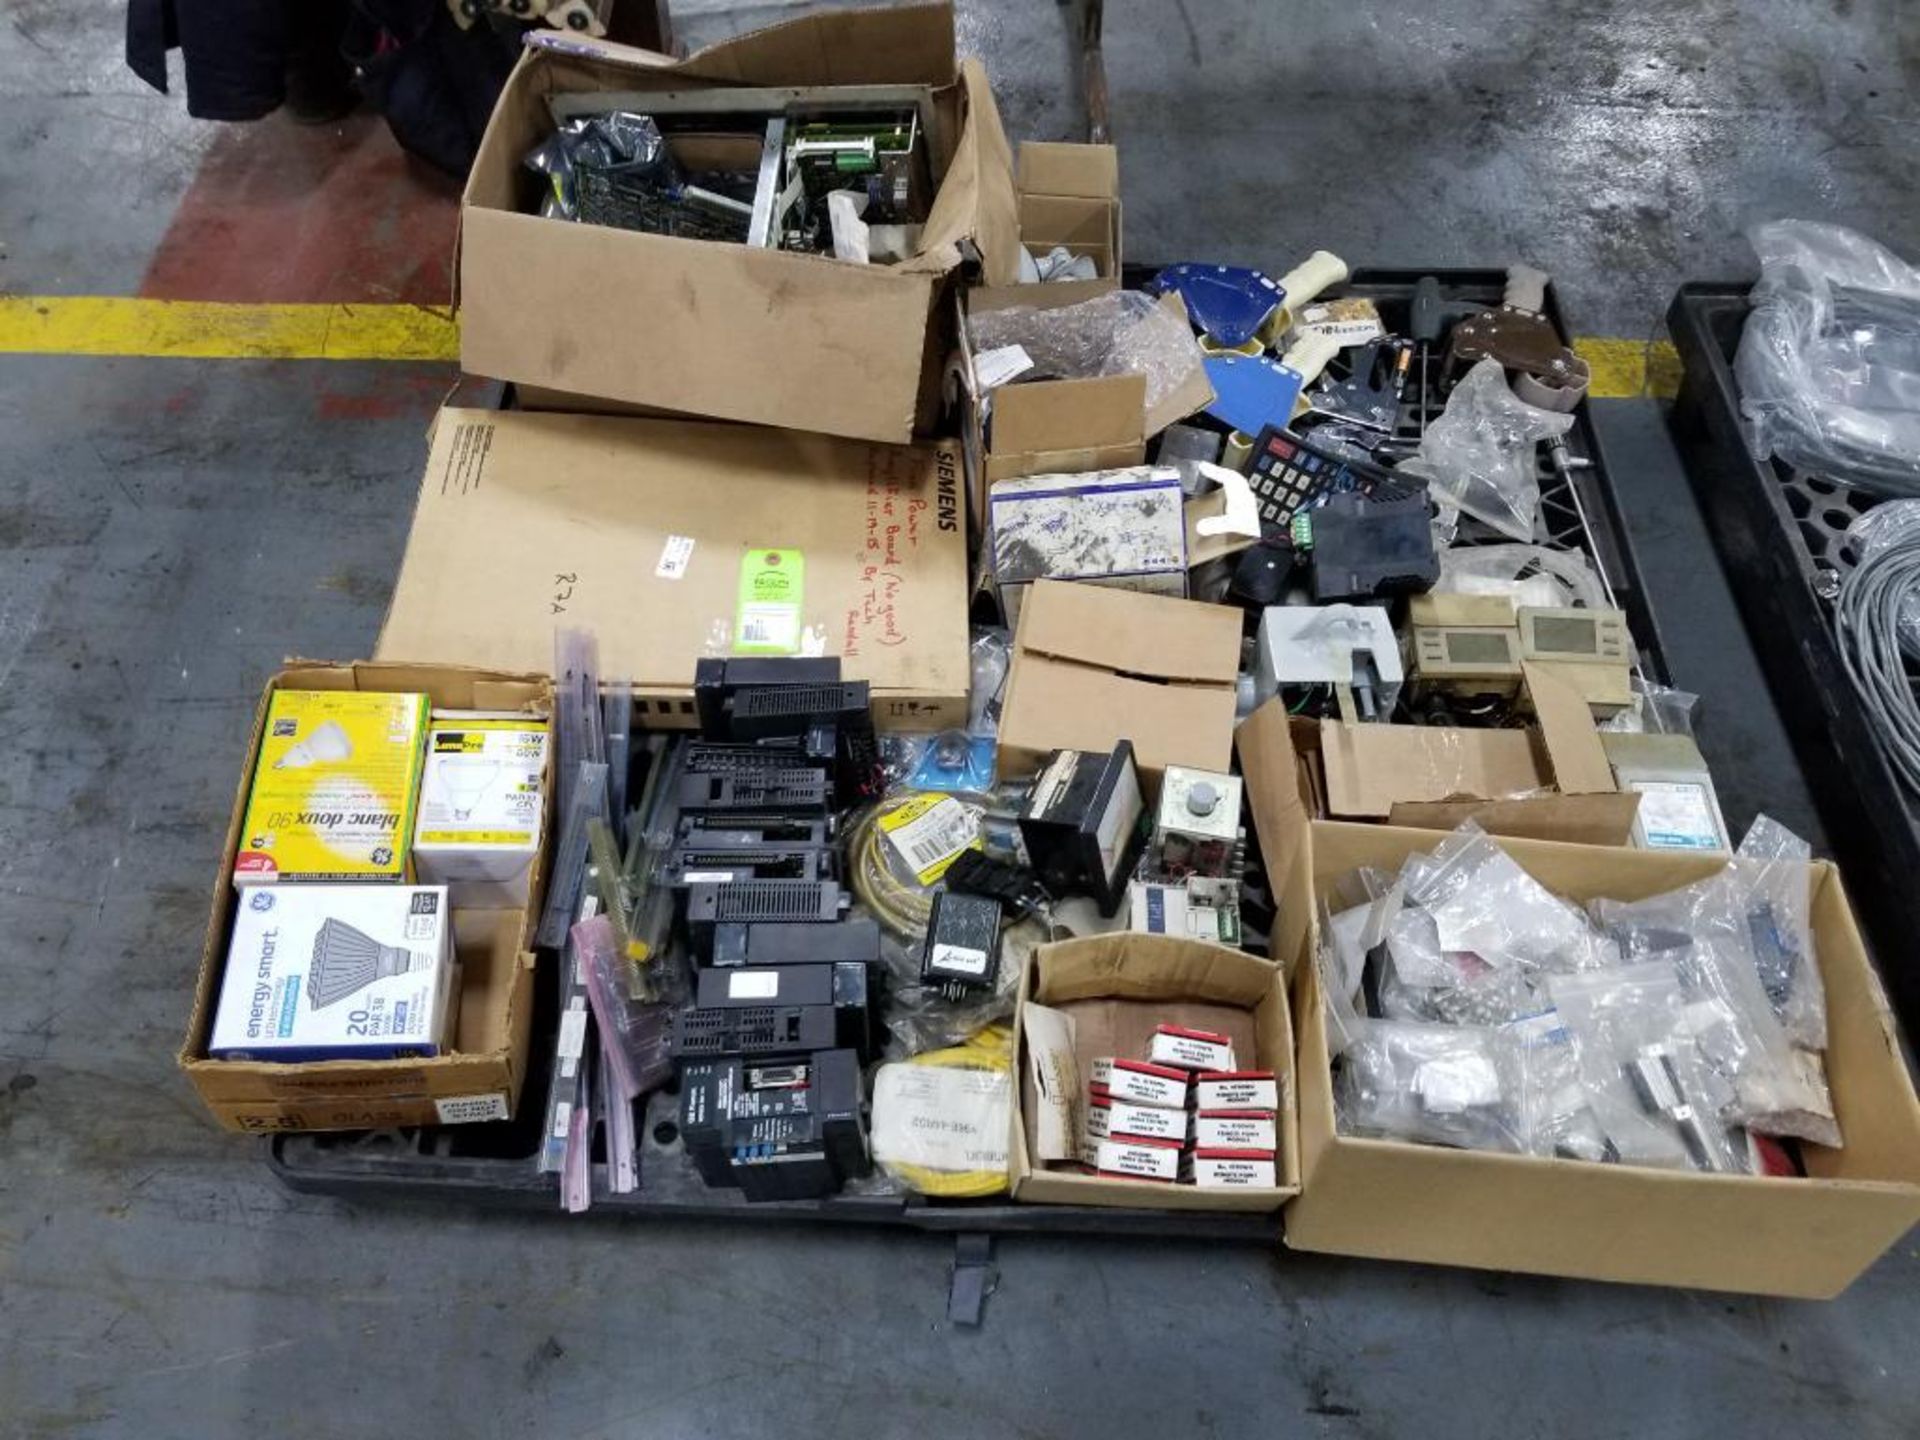 Pallet of assortet electrical and parts.